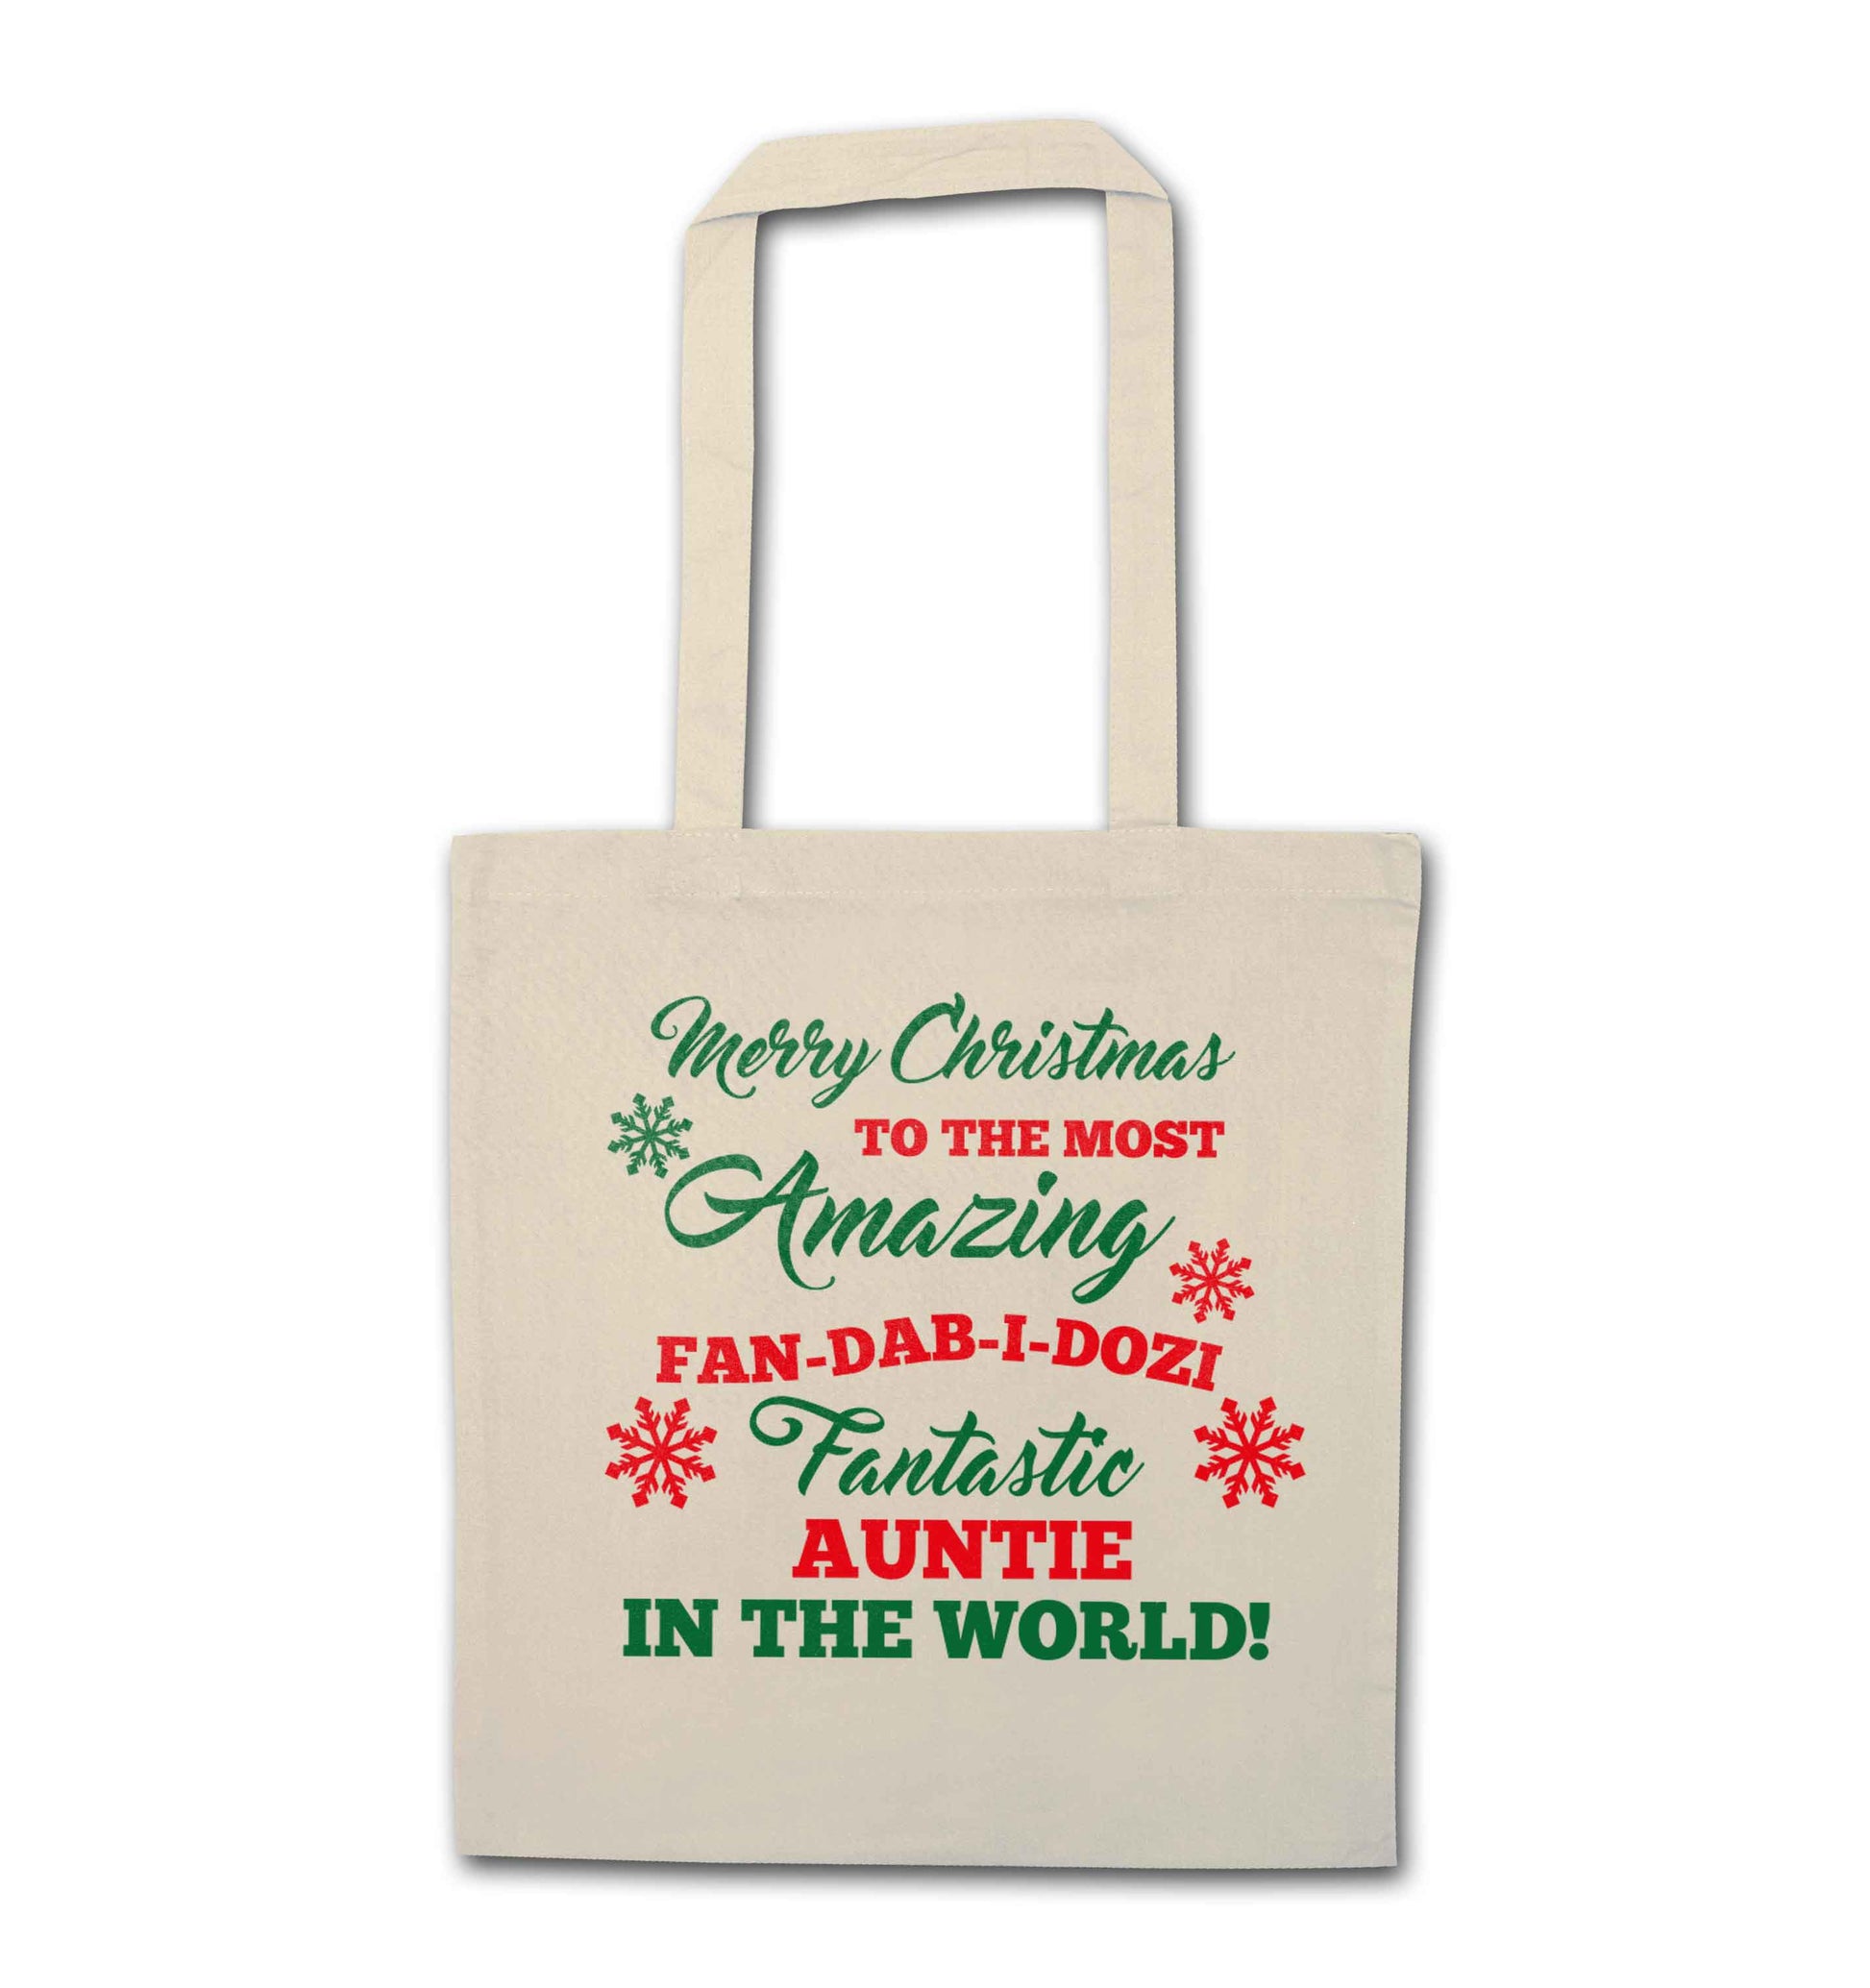 Merry Christmas to the most amazing fan-dab-i-dozi fantasic Auntie in the world natural tote bag